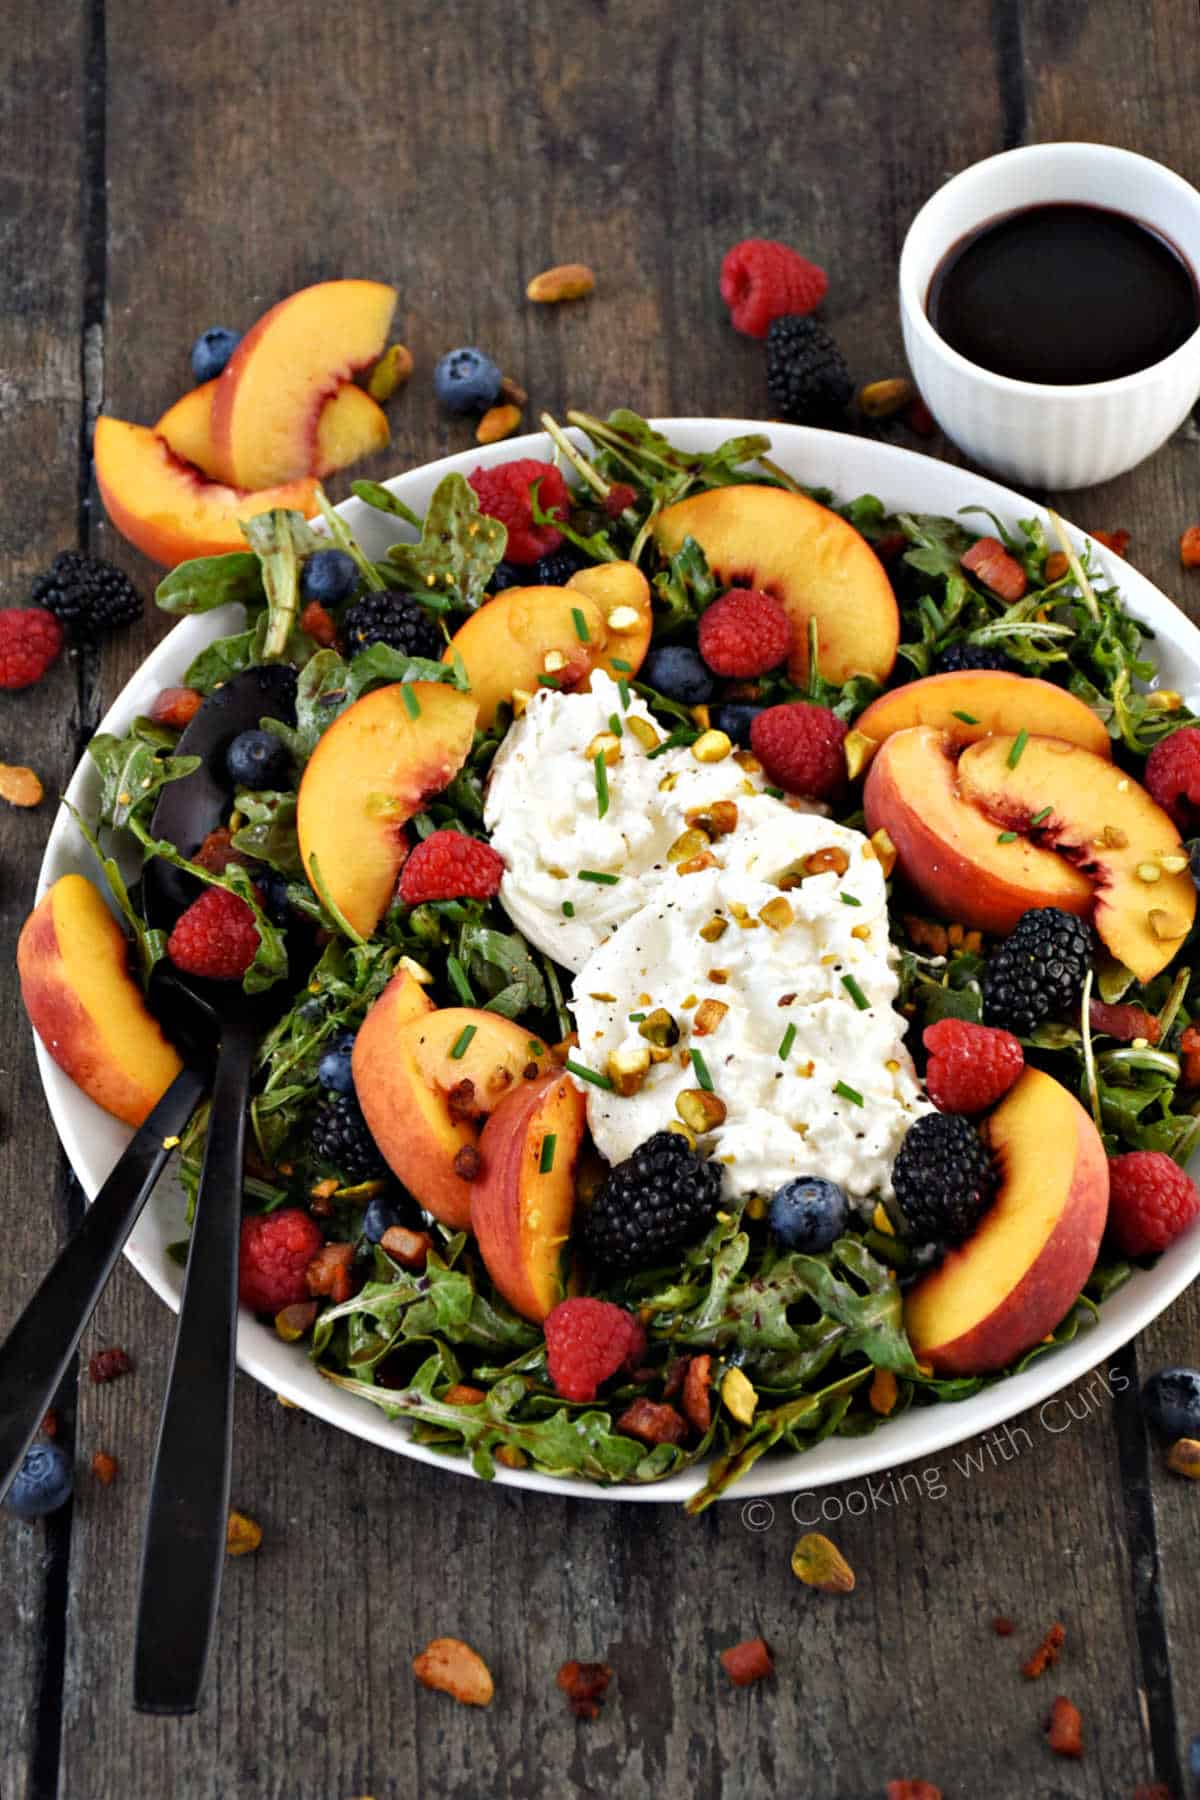 Sliced peaches, fresh berries, and fresh burrata on a bed of arugula with a bowl of vinaigrette on the side.